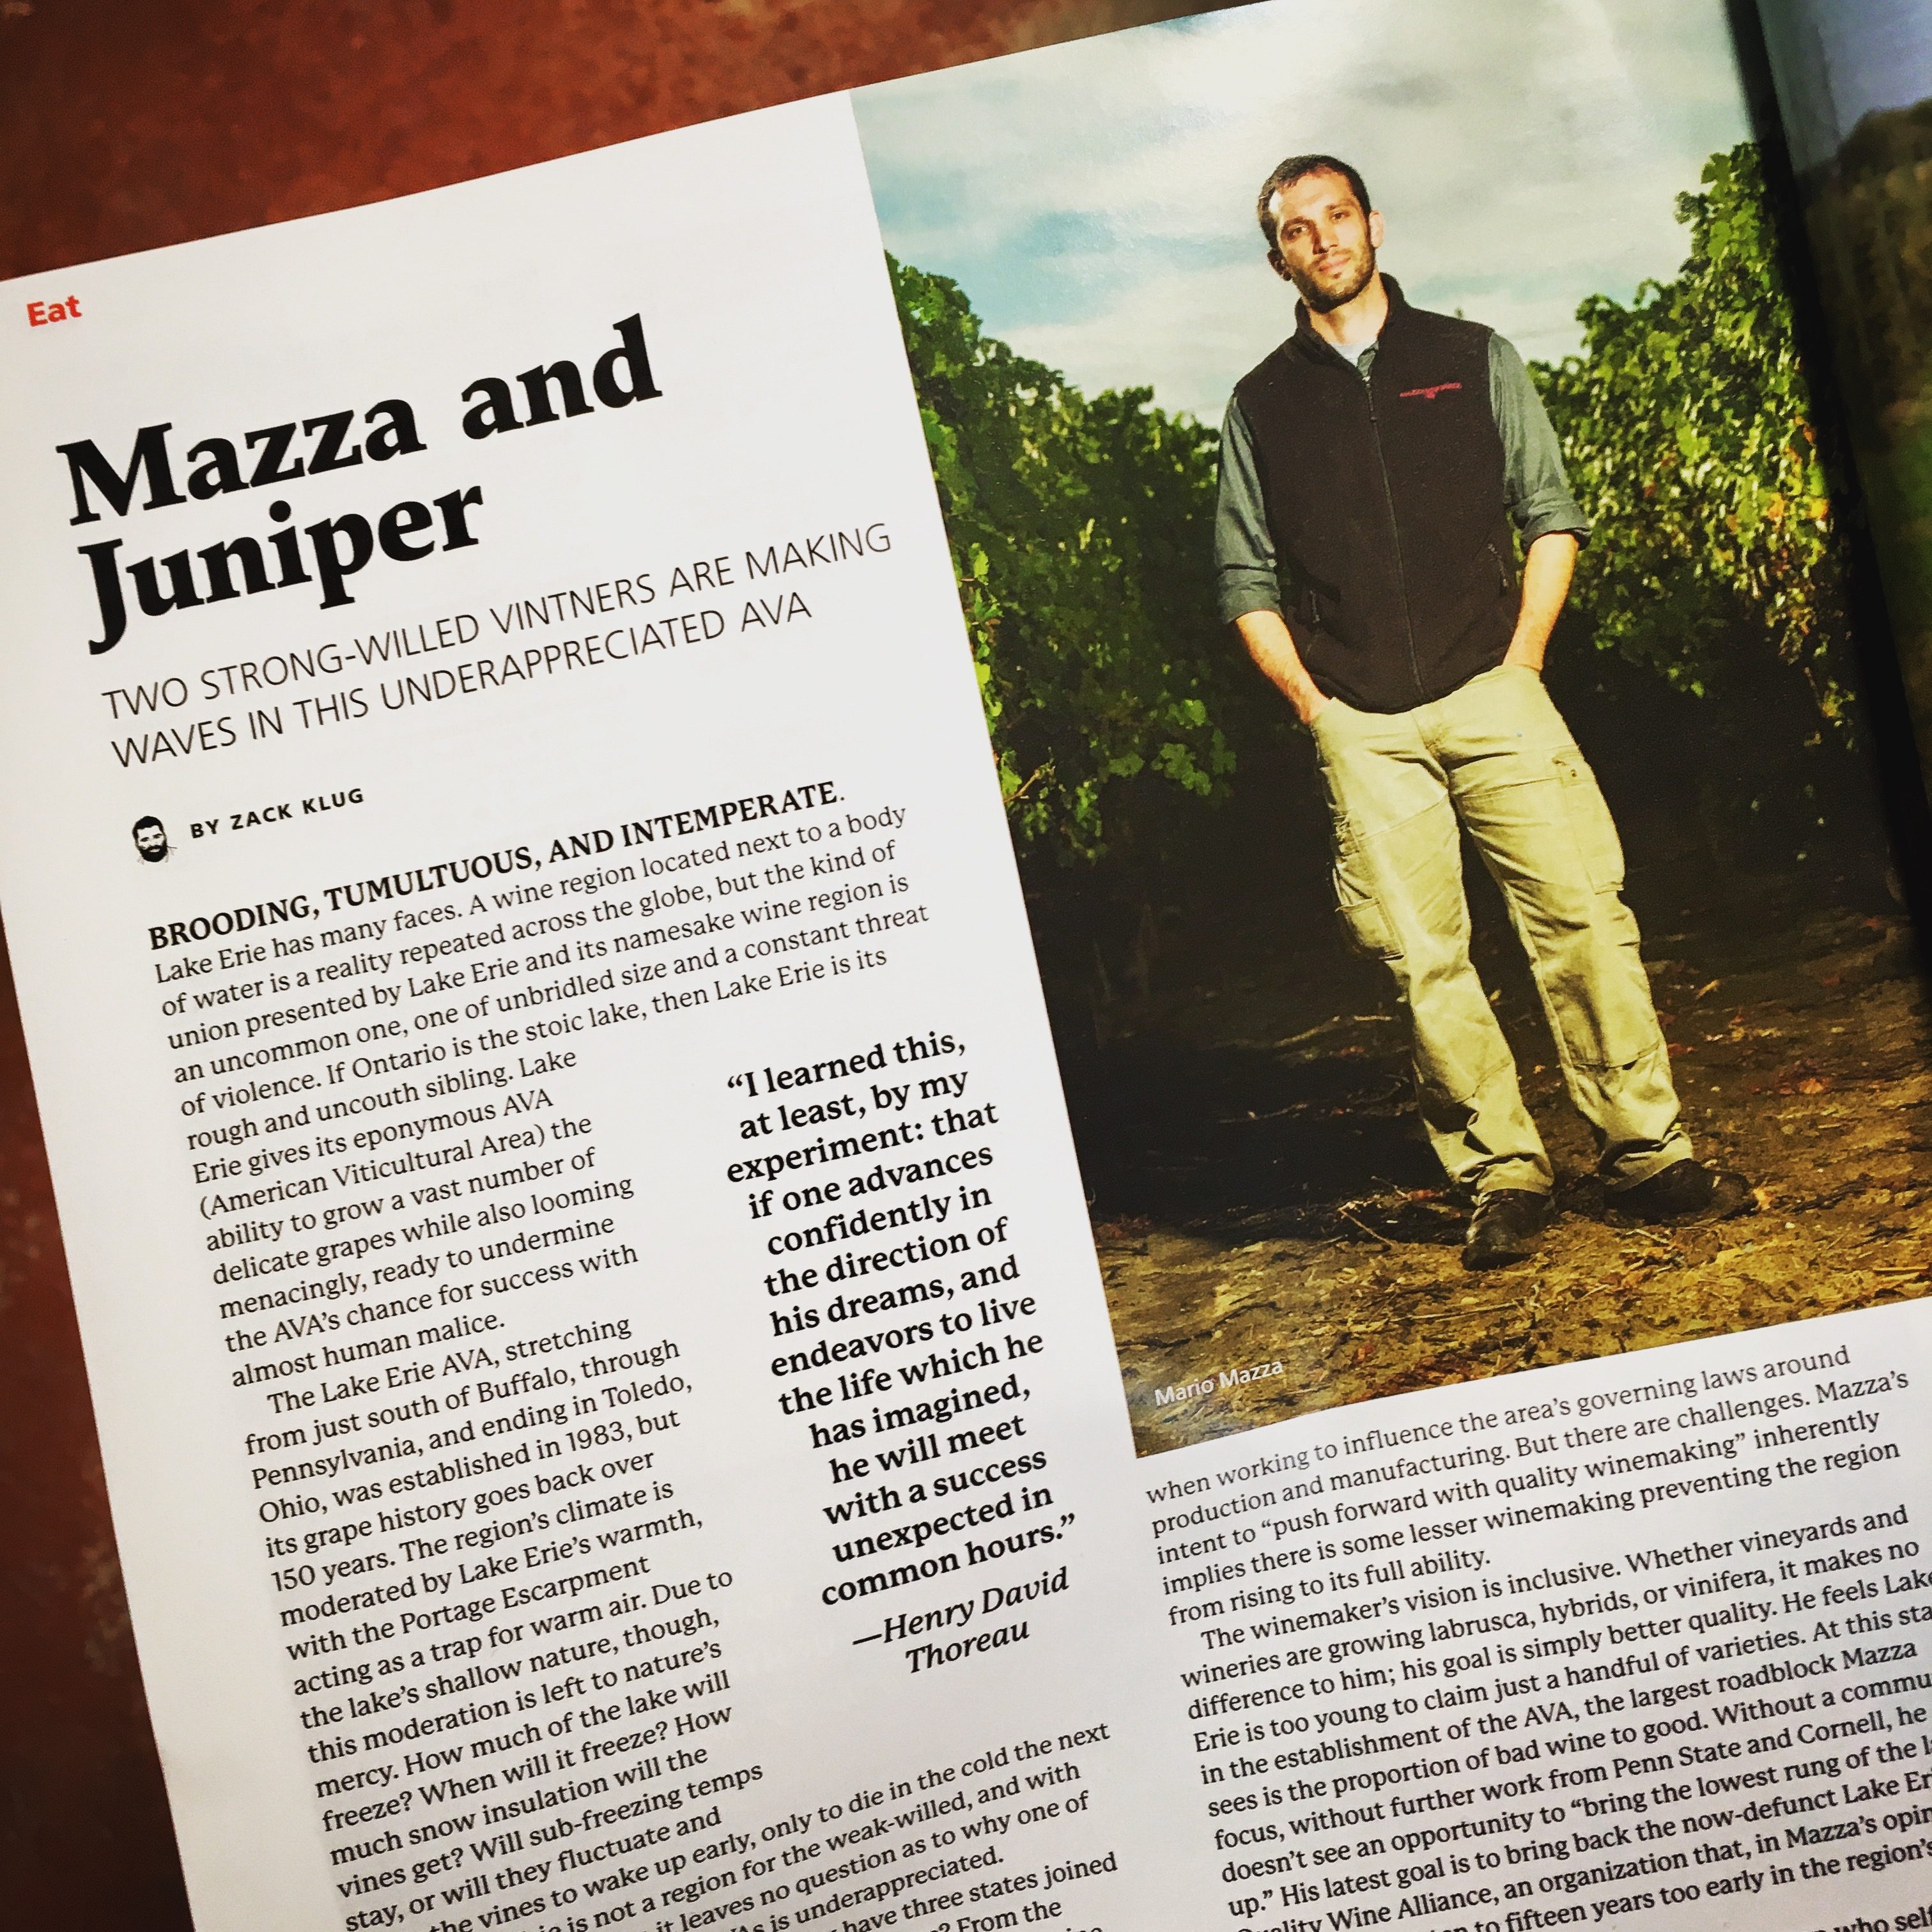 Mazza and Juniper: Two strong-willed vintners are making waves in this underappreciated AVA